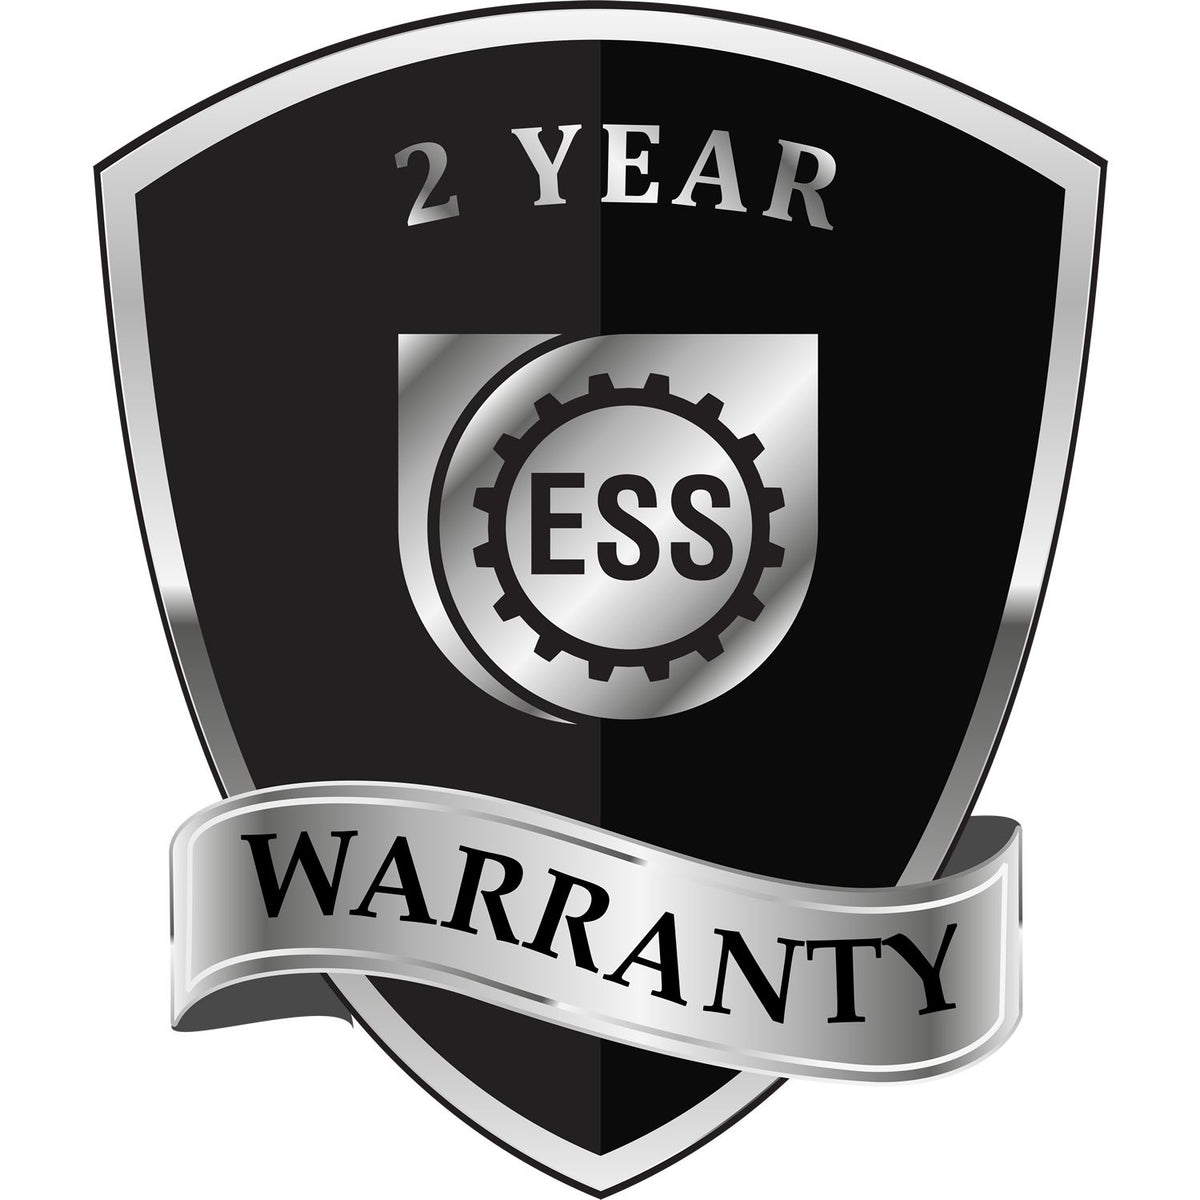 A badge or emblem showing a warranty icon for the State of California Extended Long Reach Engineer Seal